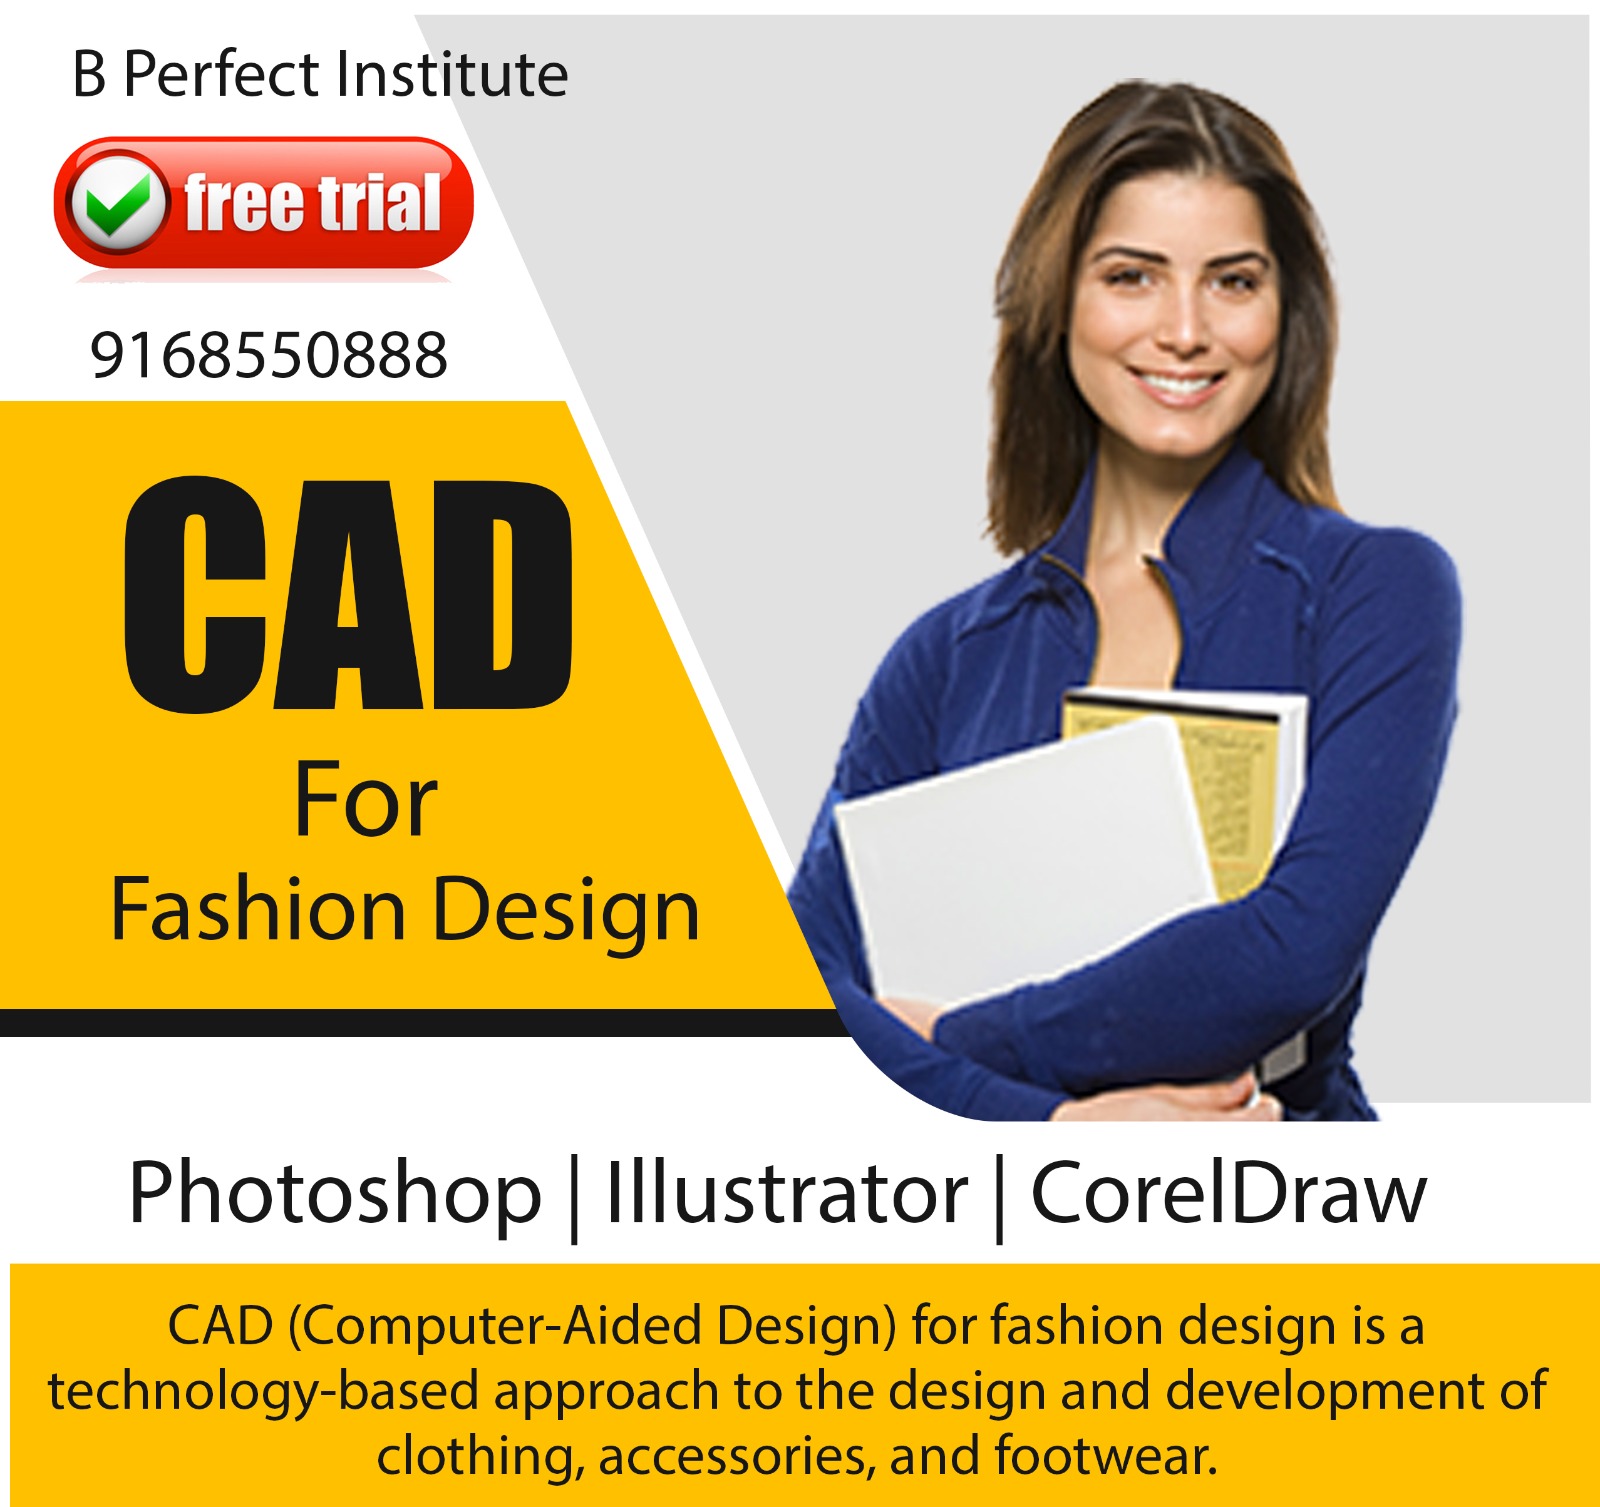 fashion CAD course is designed to provide you with the skills and knowledge you need to succeed in the fashion industry. We cover all aspects of fashion CAD, including pattern